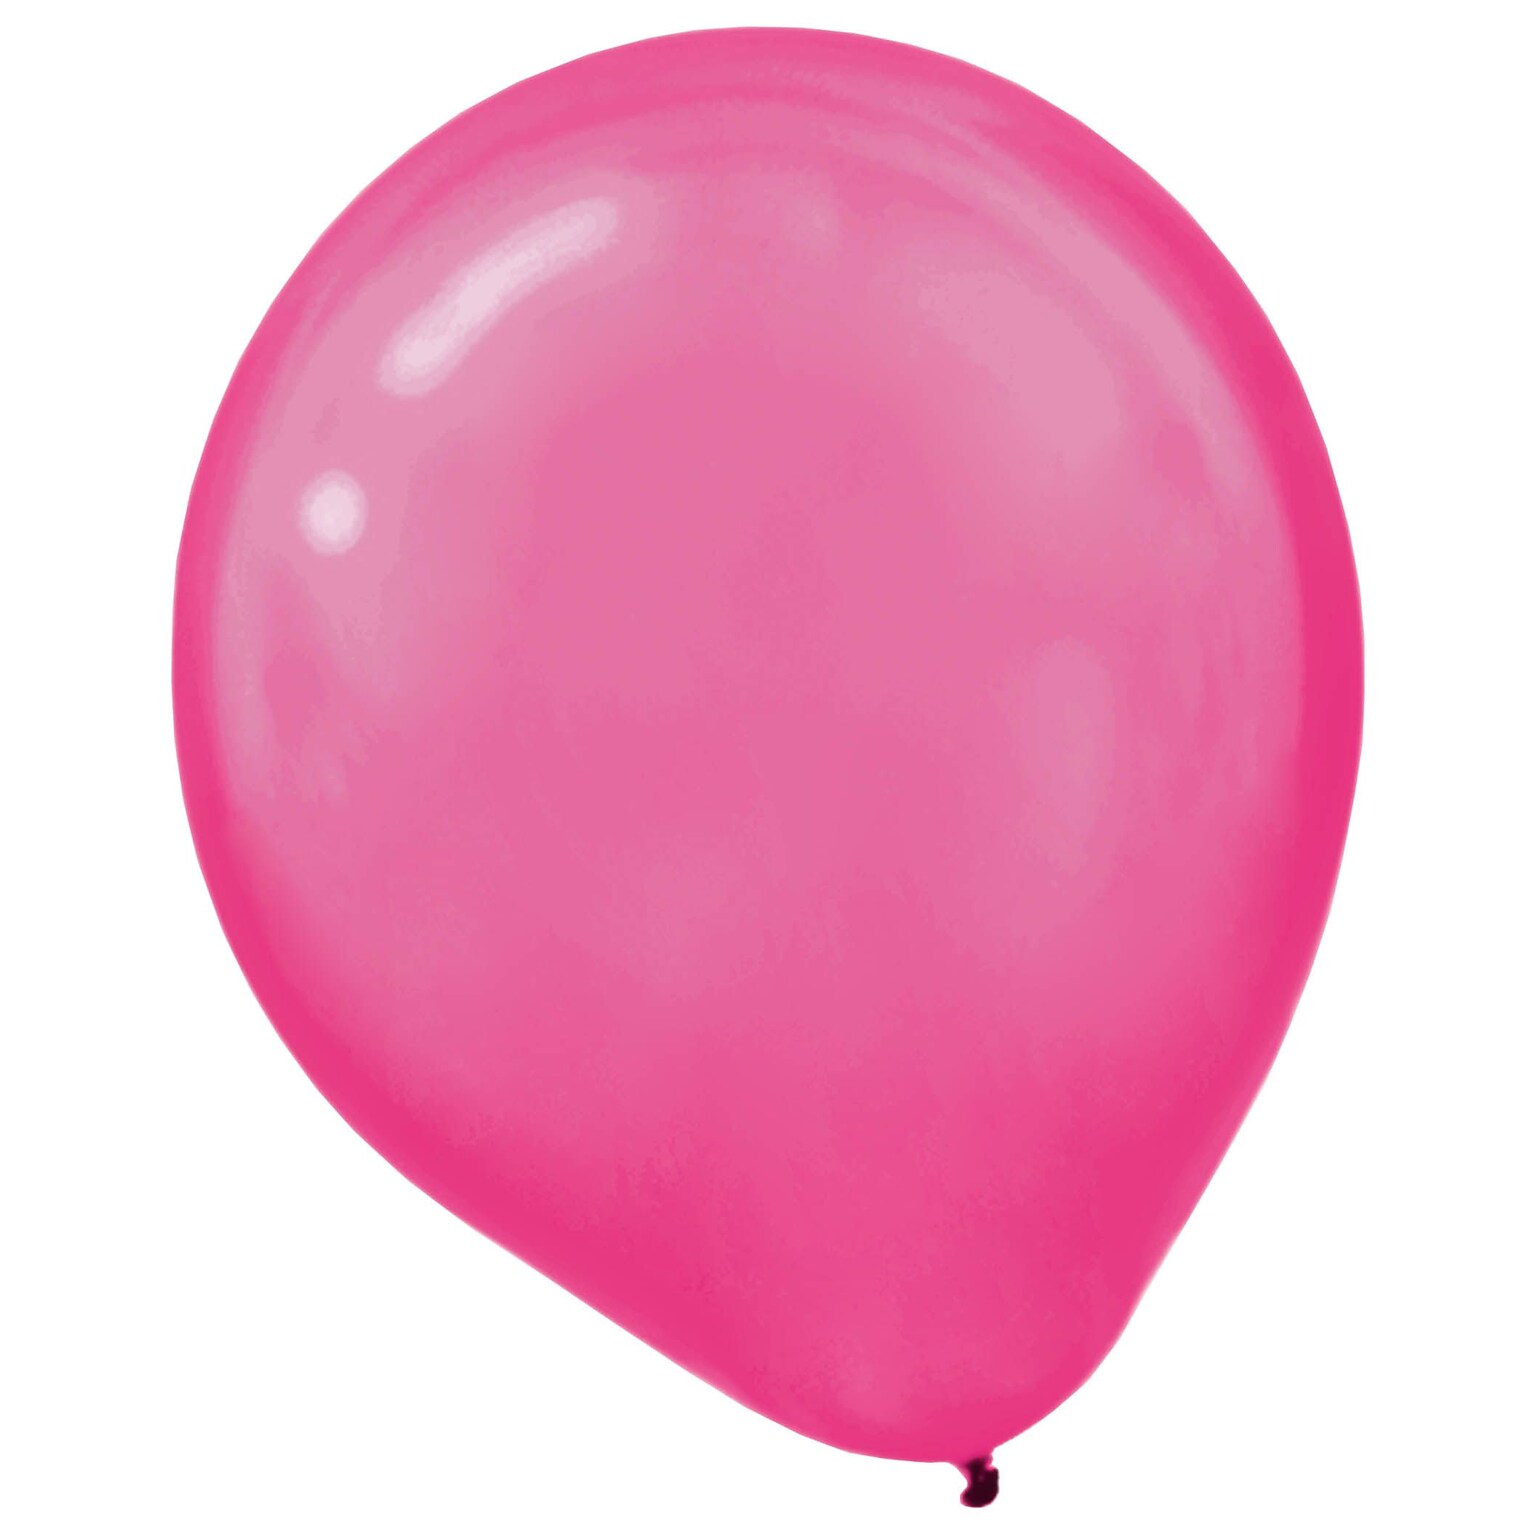 Amscan Pearlized Latex Balloons Packaged, 12, 16/Pack, Bright Pink, 15 Per Pack (113253.103)